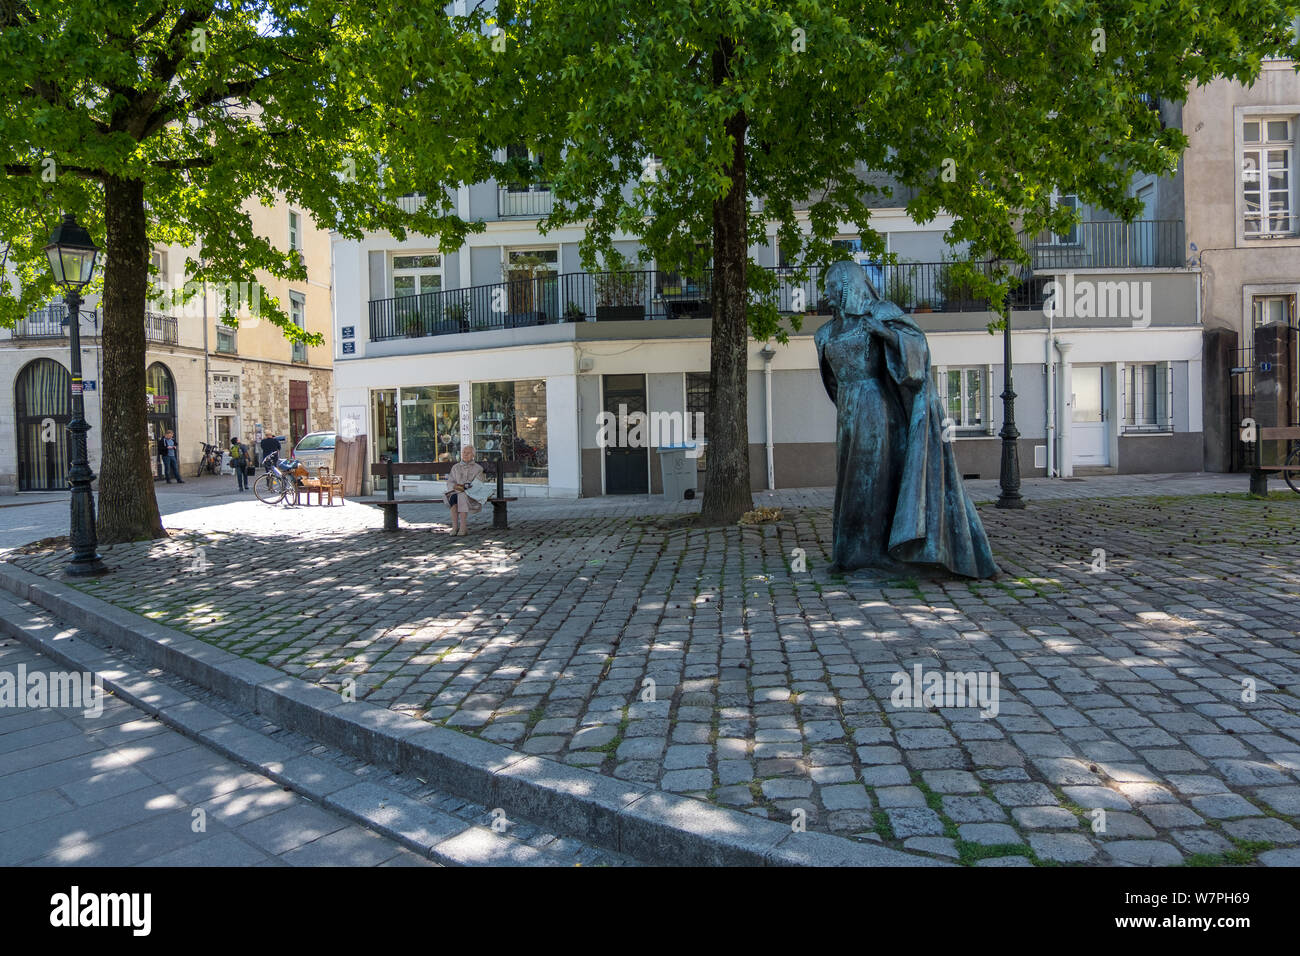 Nantes, France - May 12, 2019: One elderly woman sitting on the bench under green trees near statue of Anne de Bretagne Queen of France. Nantes France Stock Photo